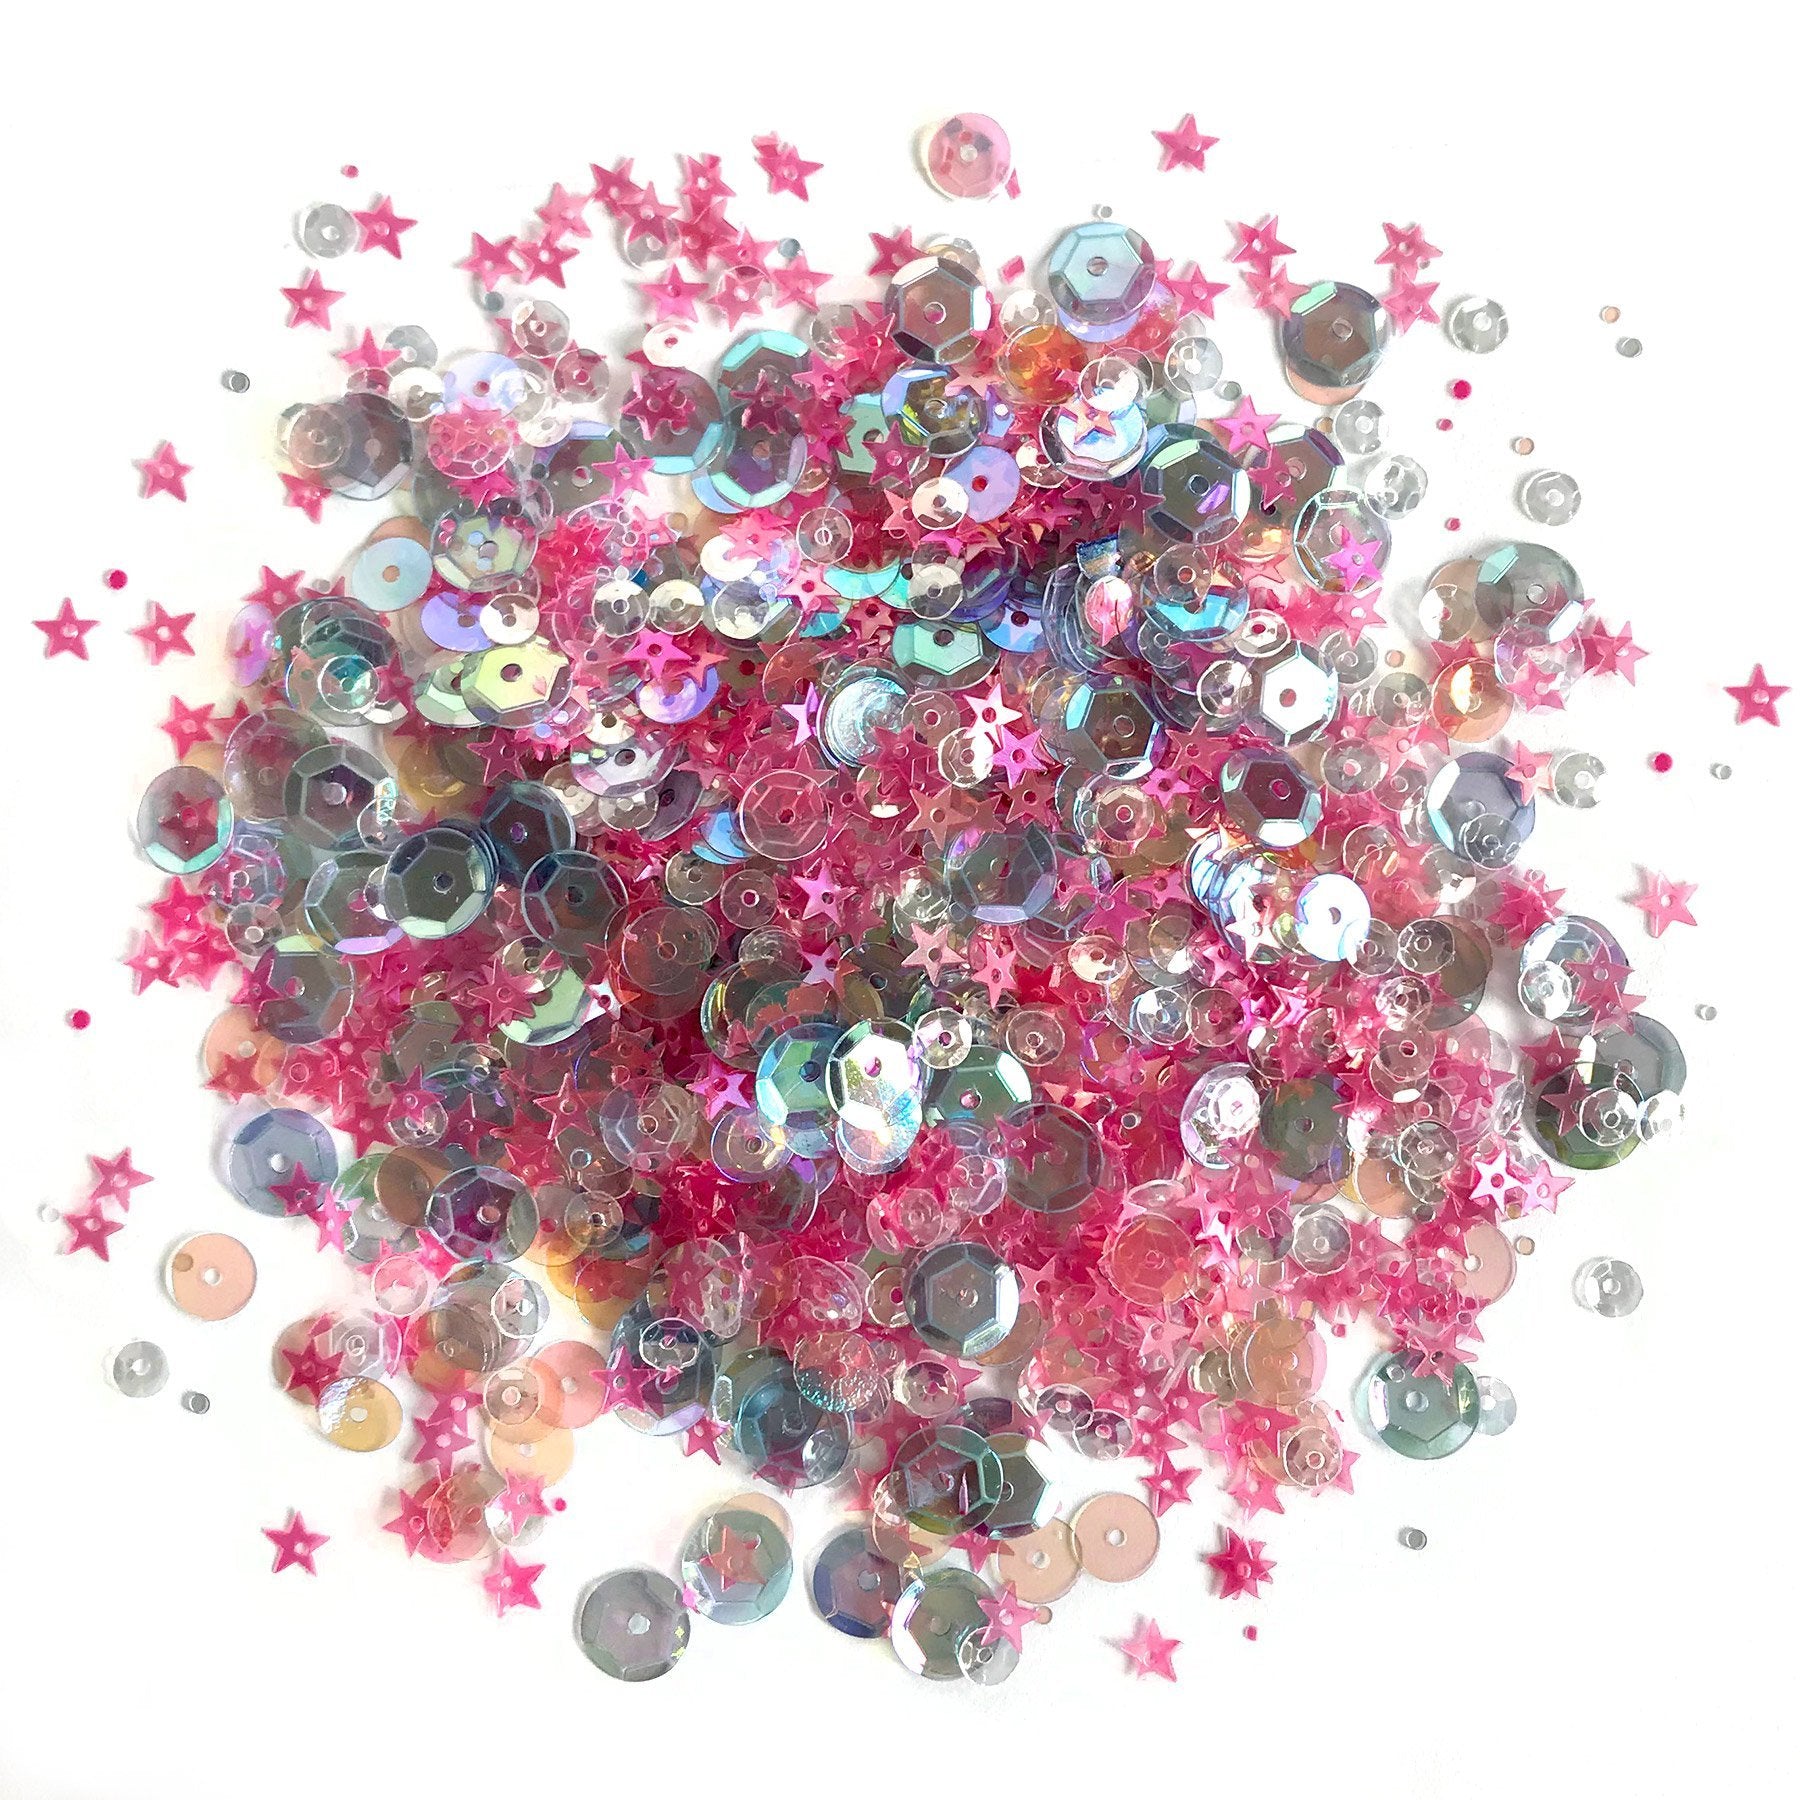 Glittering Galaxy - PS771 - Buttons Galore and More